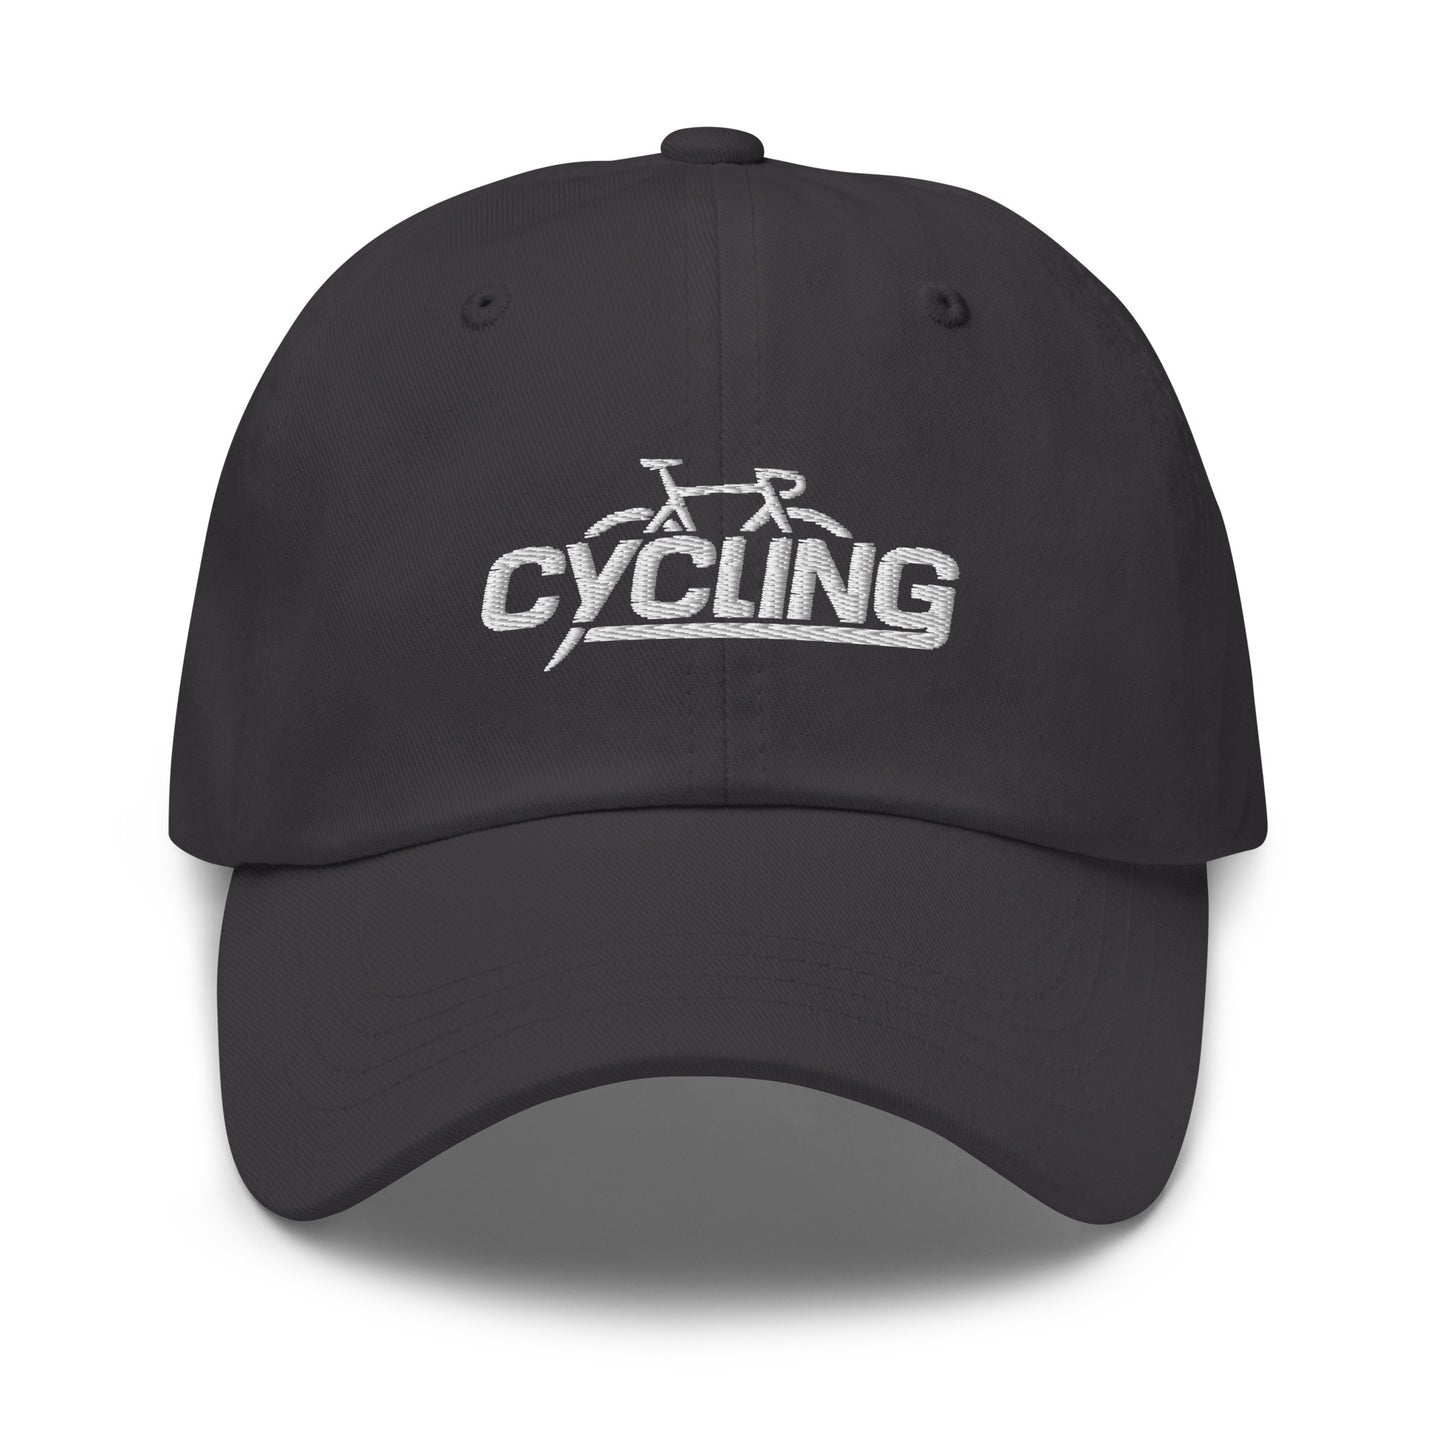 Cycling hat, Bicycle hat, bike hat, cycle hat gray grey